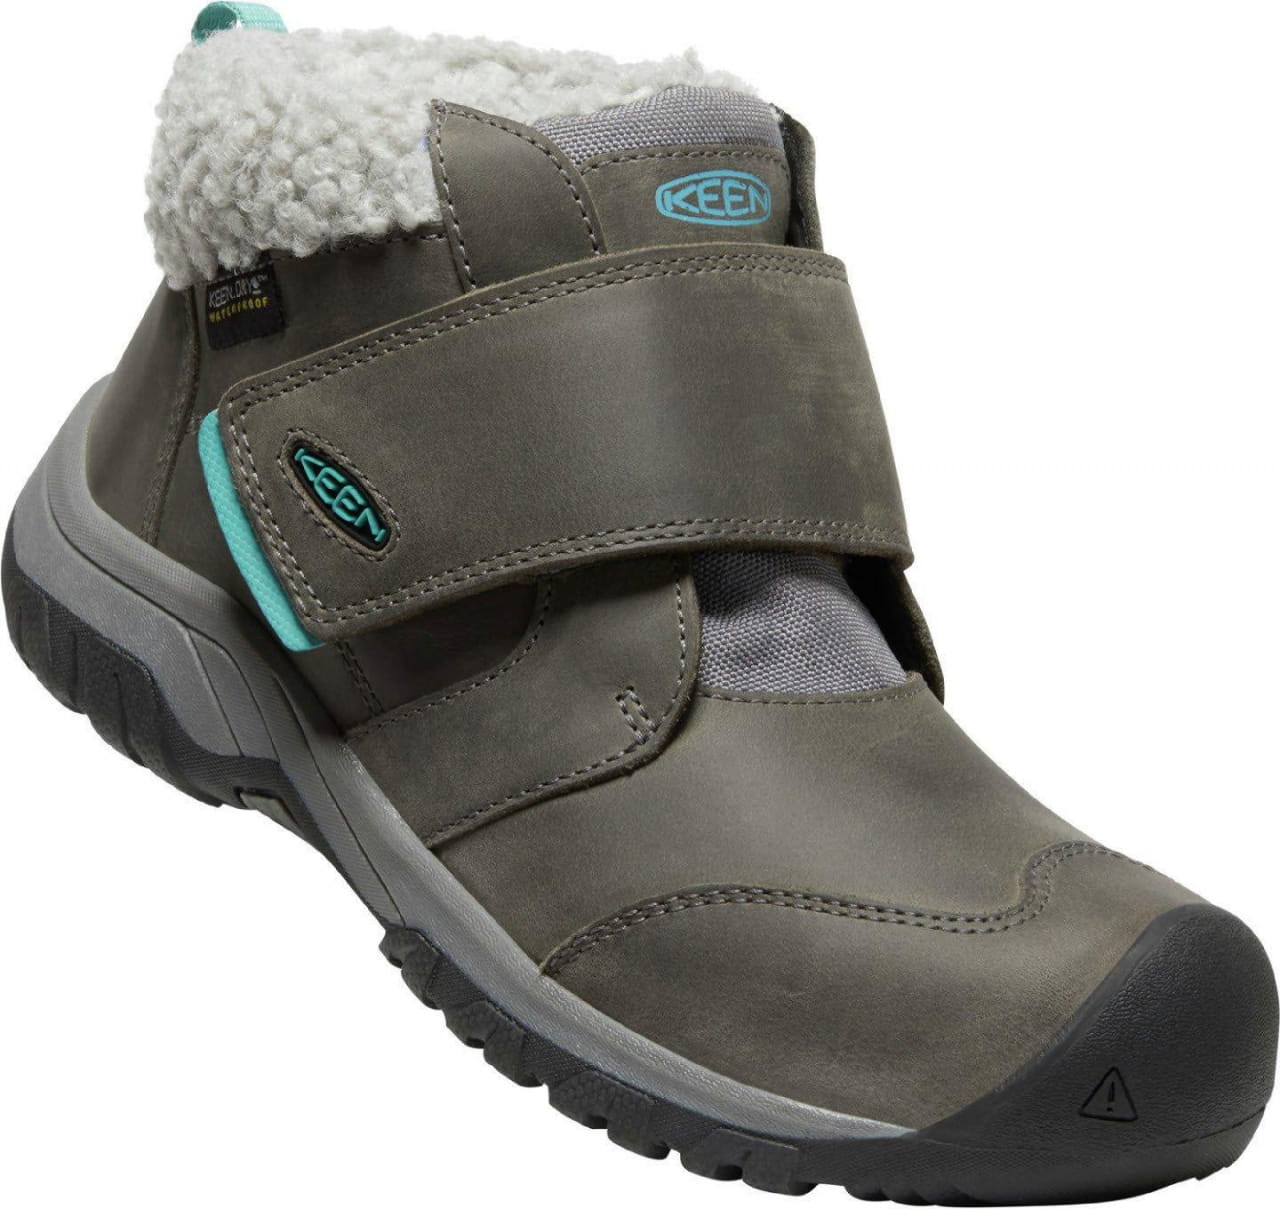 Chaussures d'hiver pour enfants Keen Kootenay IV Mid Wp Y